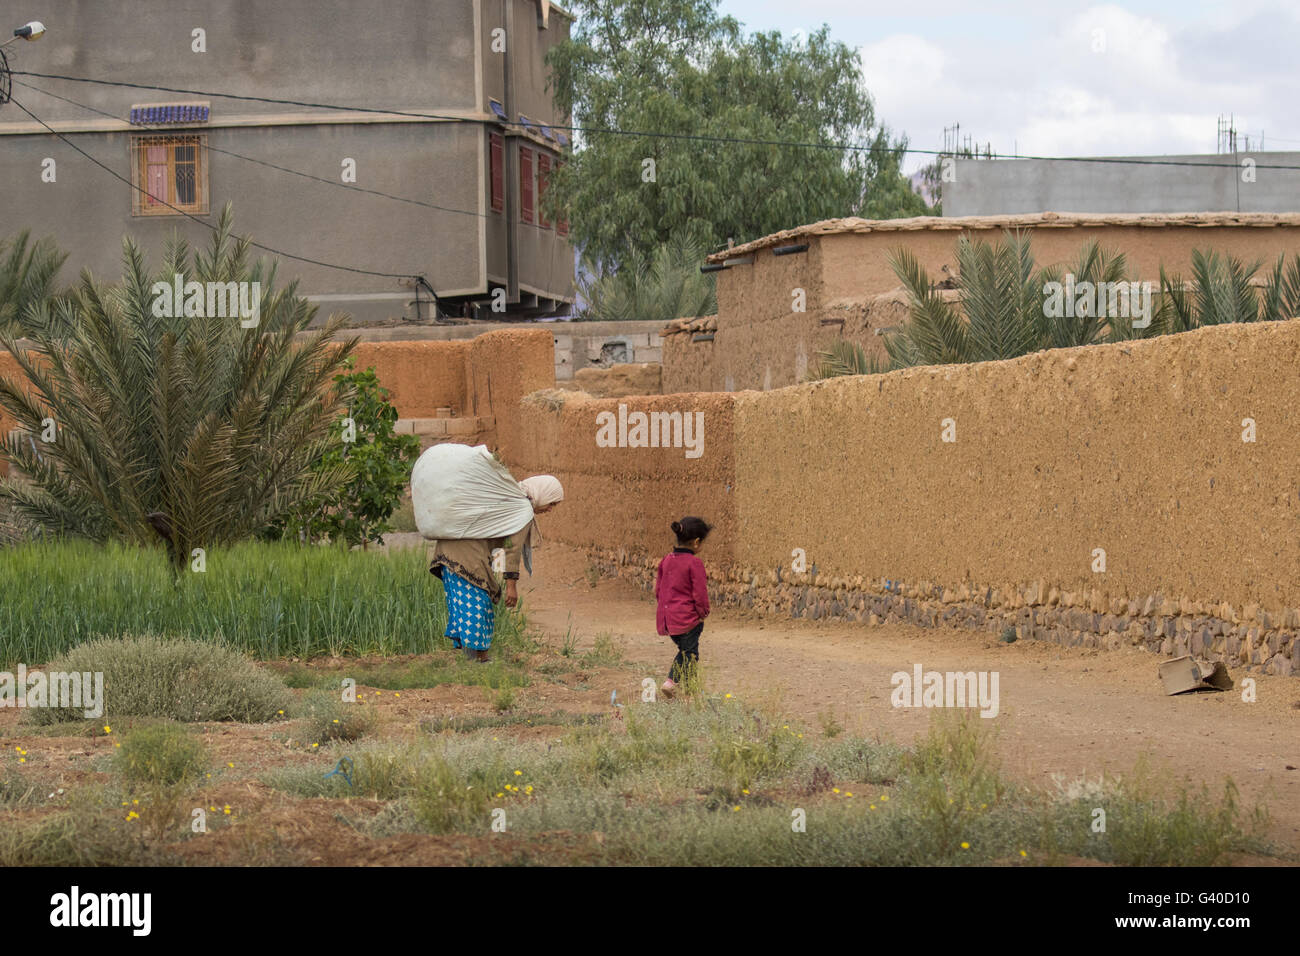 Backview of Morrocan woman with heavy load and small child returning to house, Stock Photo